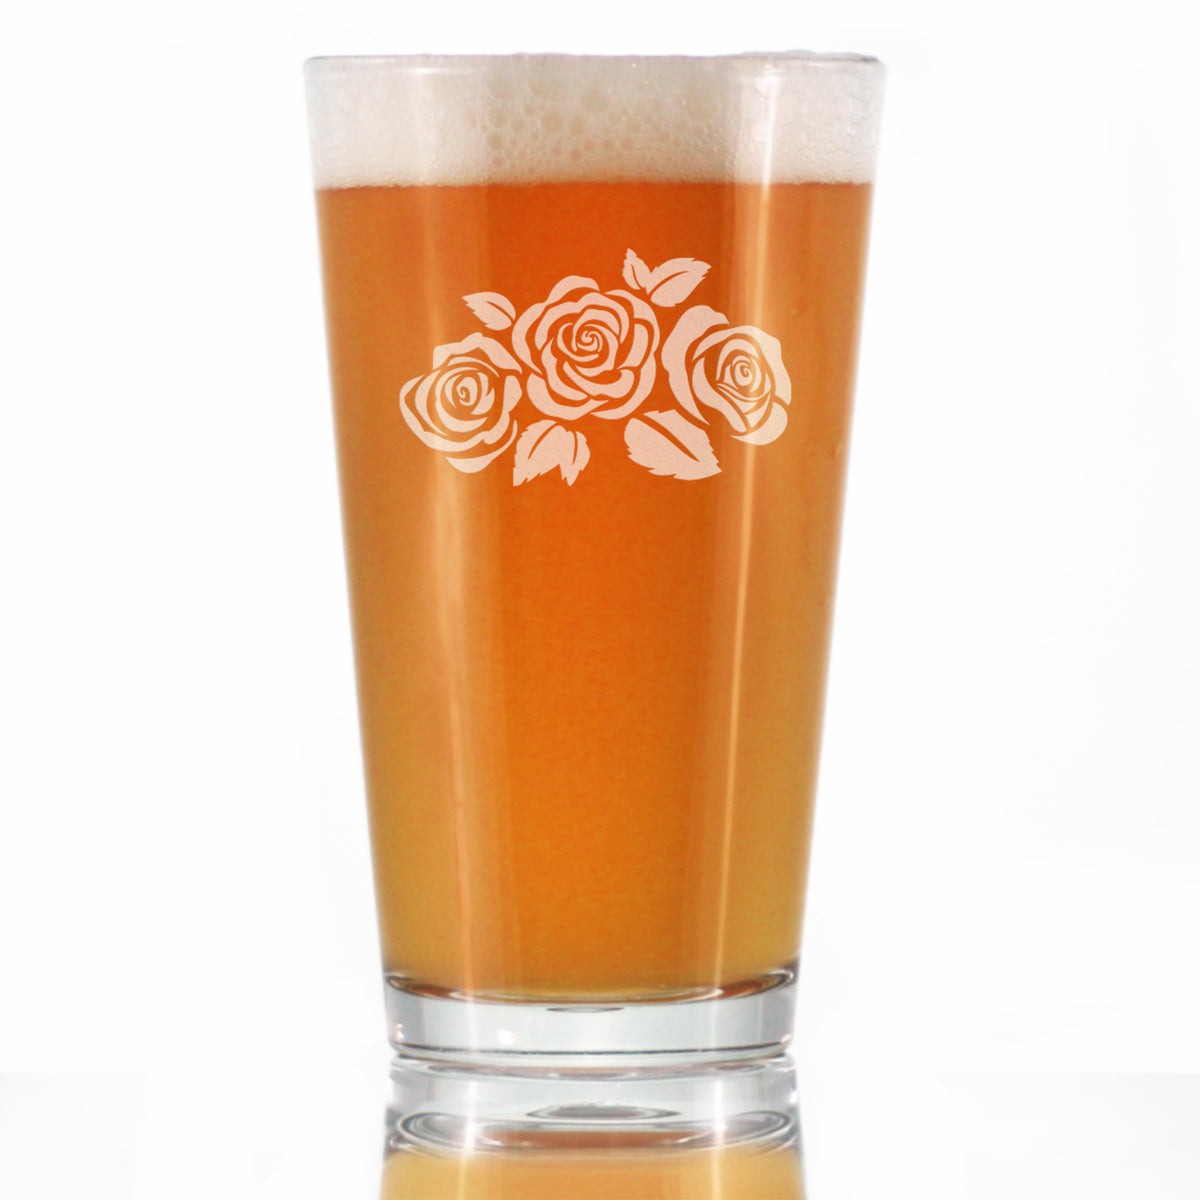 Roses - 16 Ounce Pint Glass